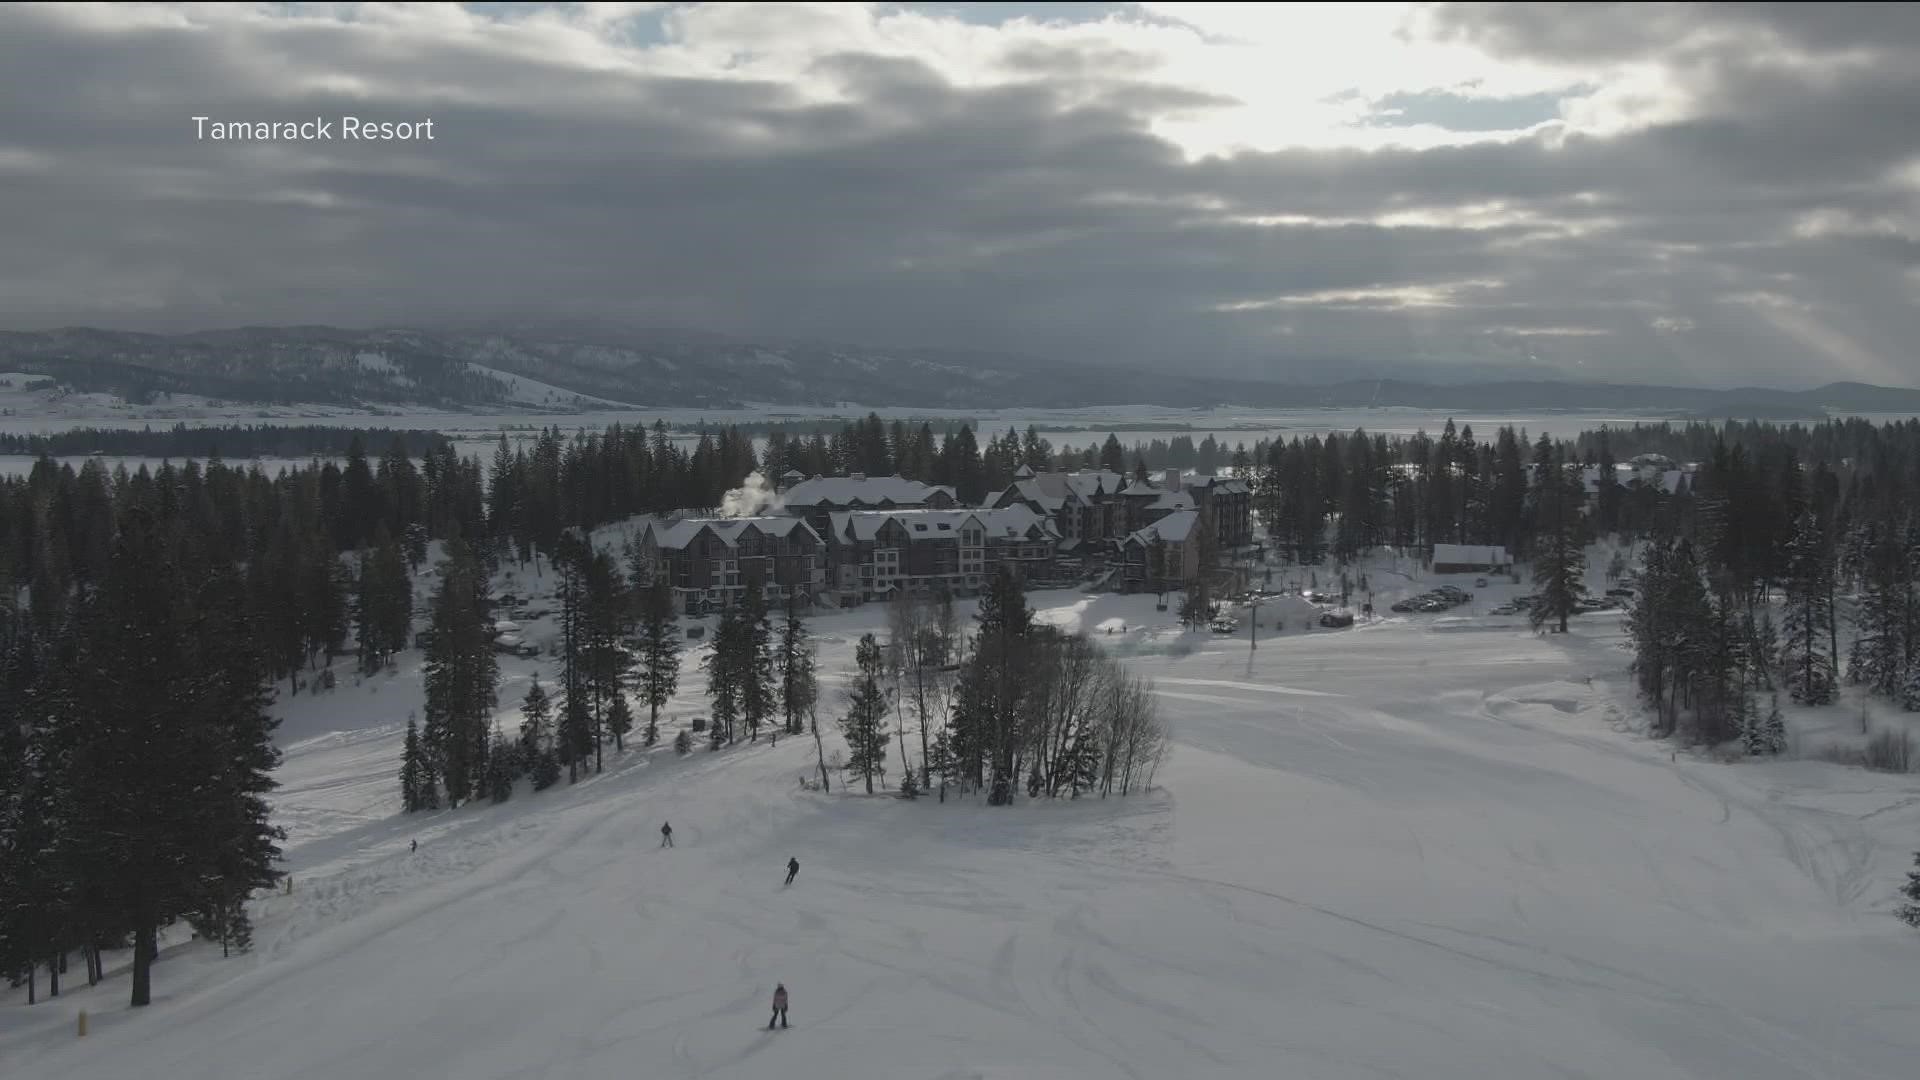 Tamarack Resort near Donnelly has expanded options for locals, including free passes for Valley County students and discounts for Idaho teachers.